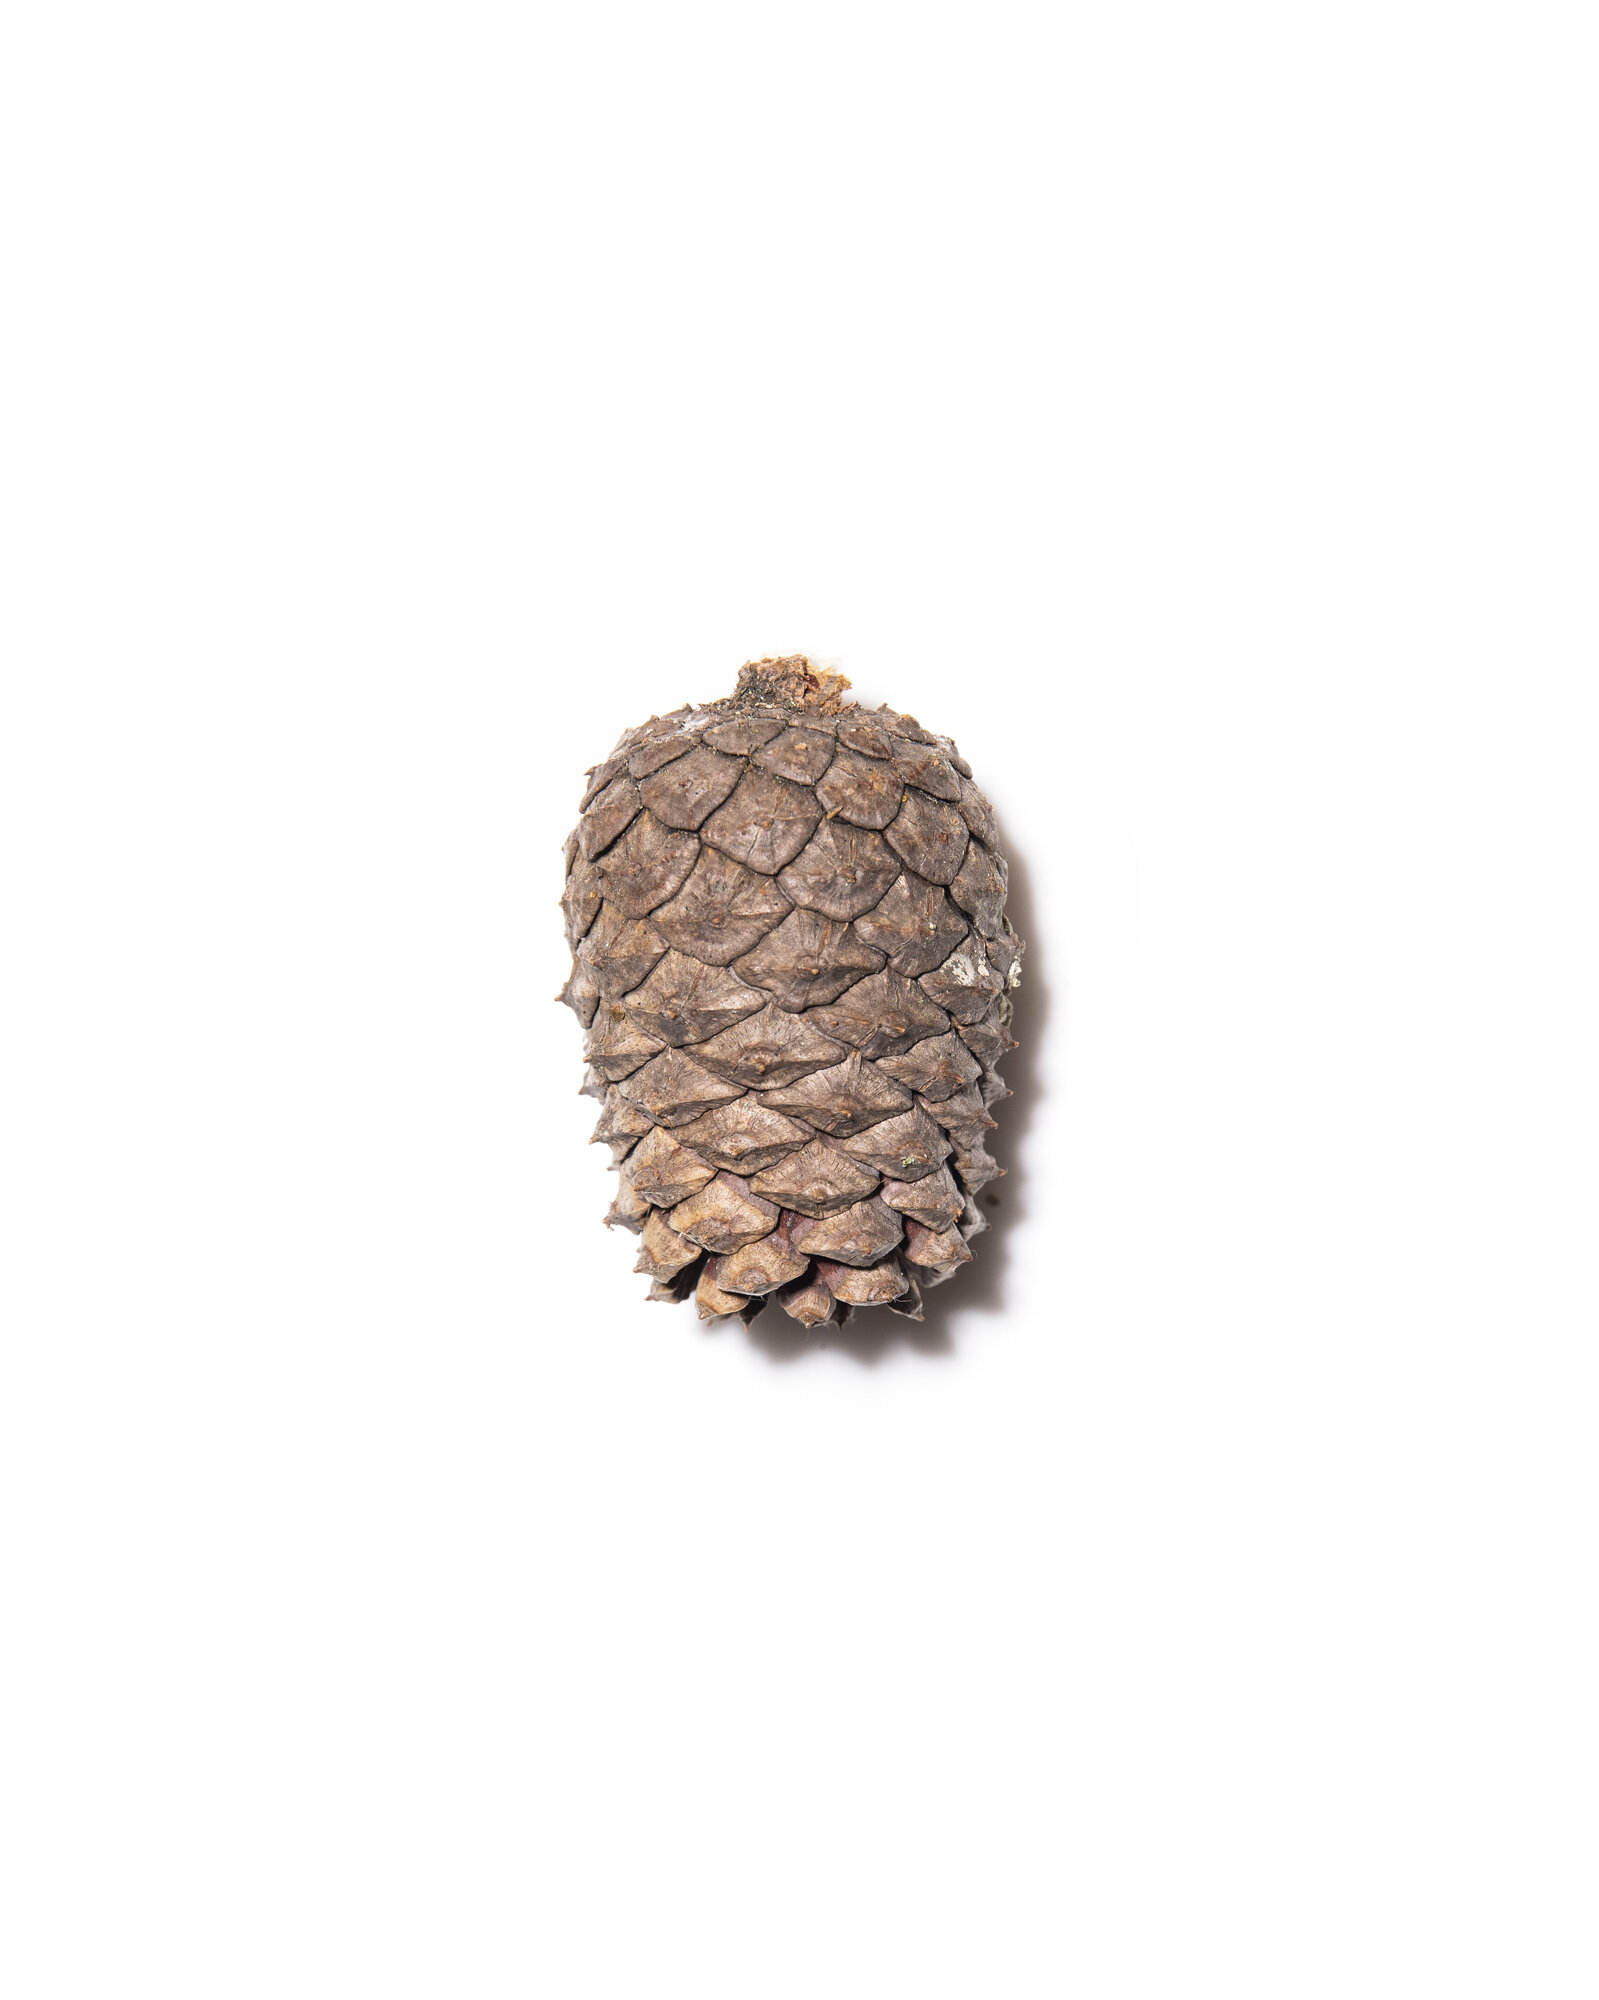 3258_Pinus_rigida_national_champion_pitch_pine_new_hampshire_8_22_2019_american_forests_brian_kelley_cone.jpg